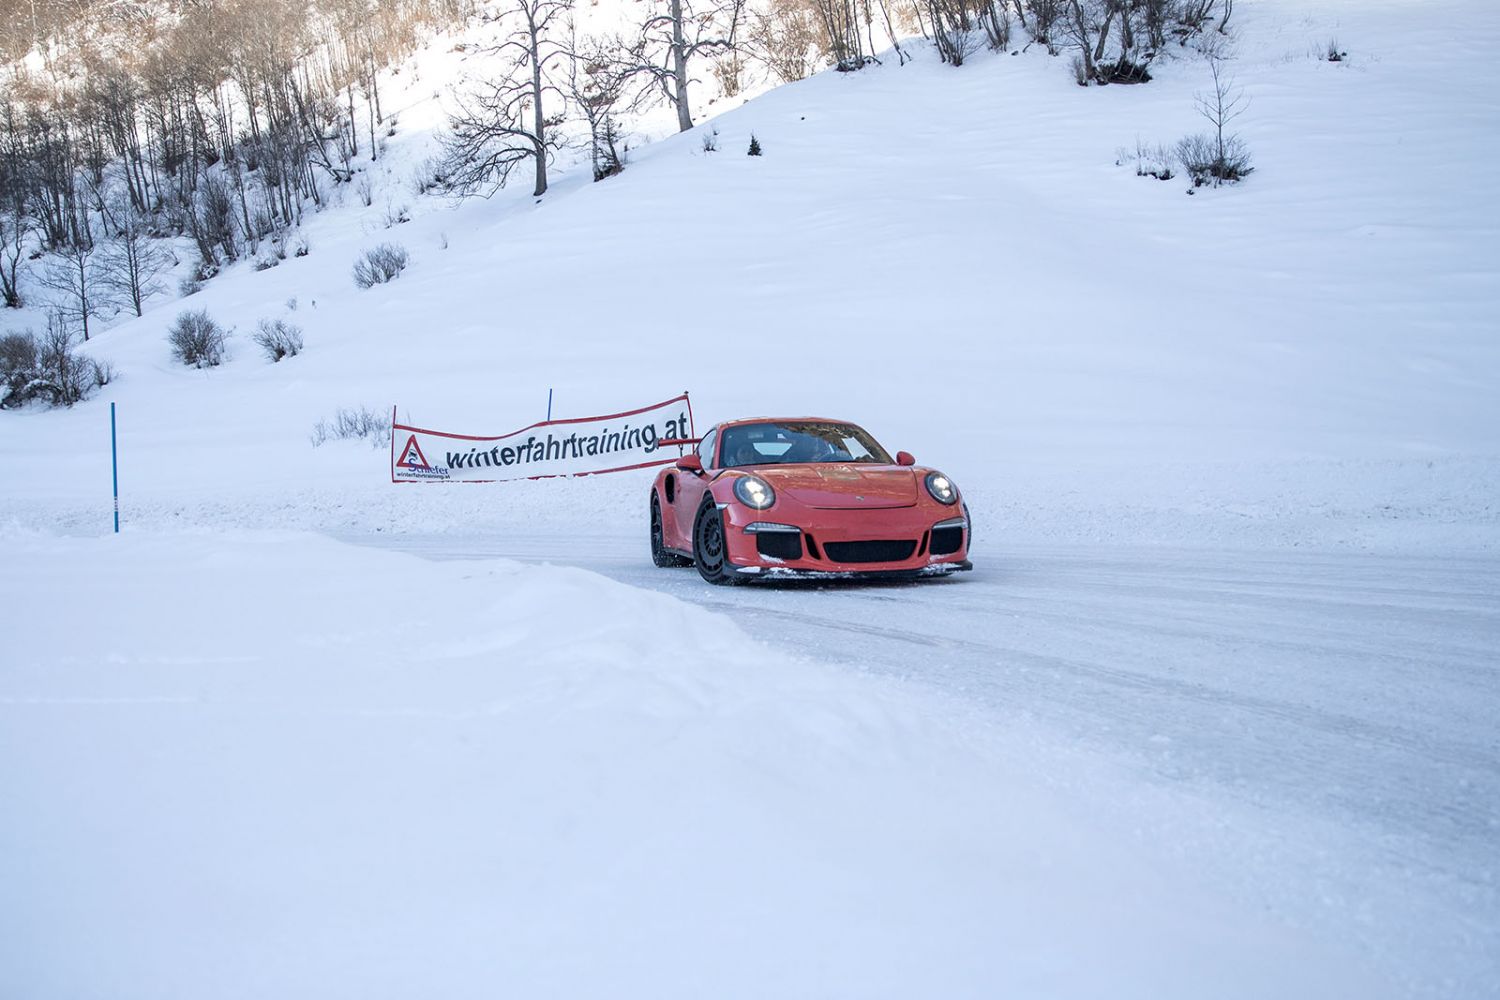 Winter driving training in the Lungau - driving safety training on the ice and snow tracks of www.winterfahrtraining.at